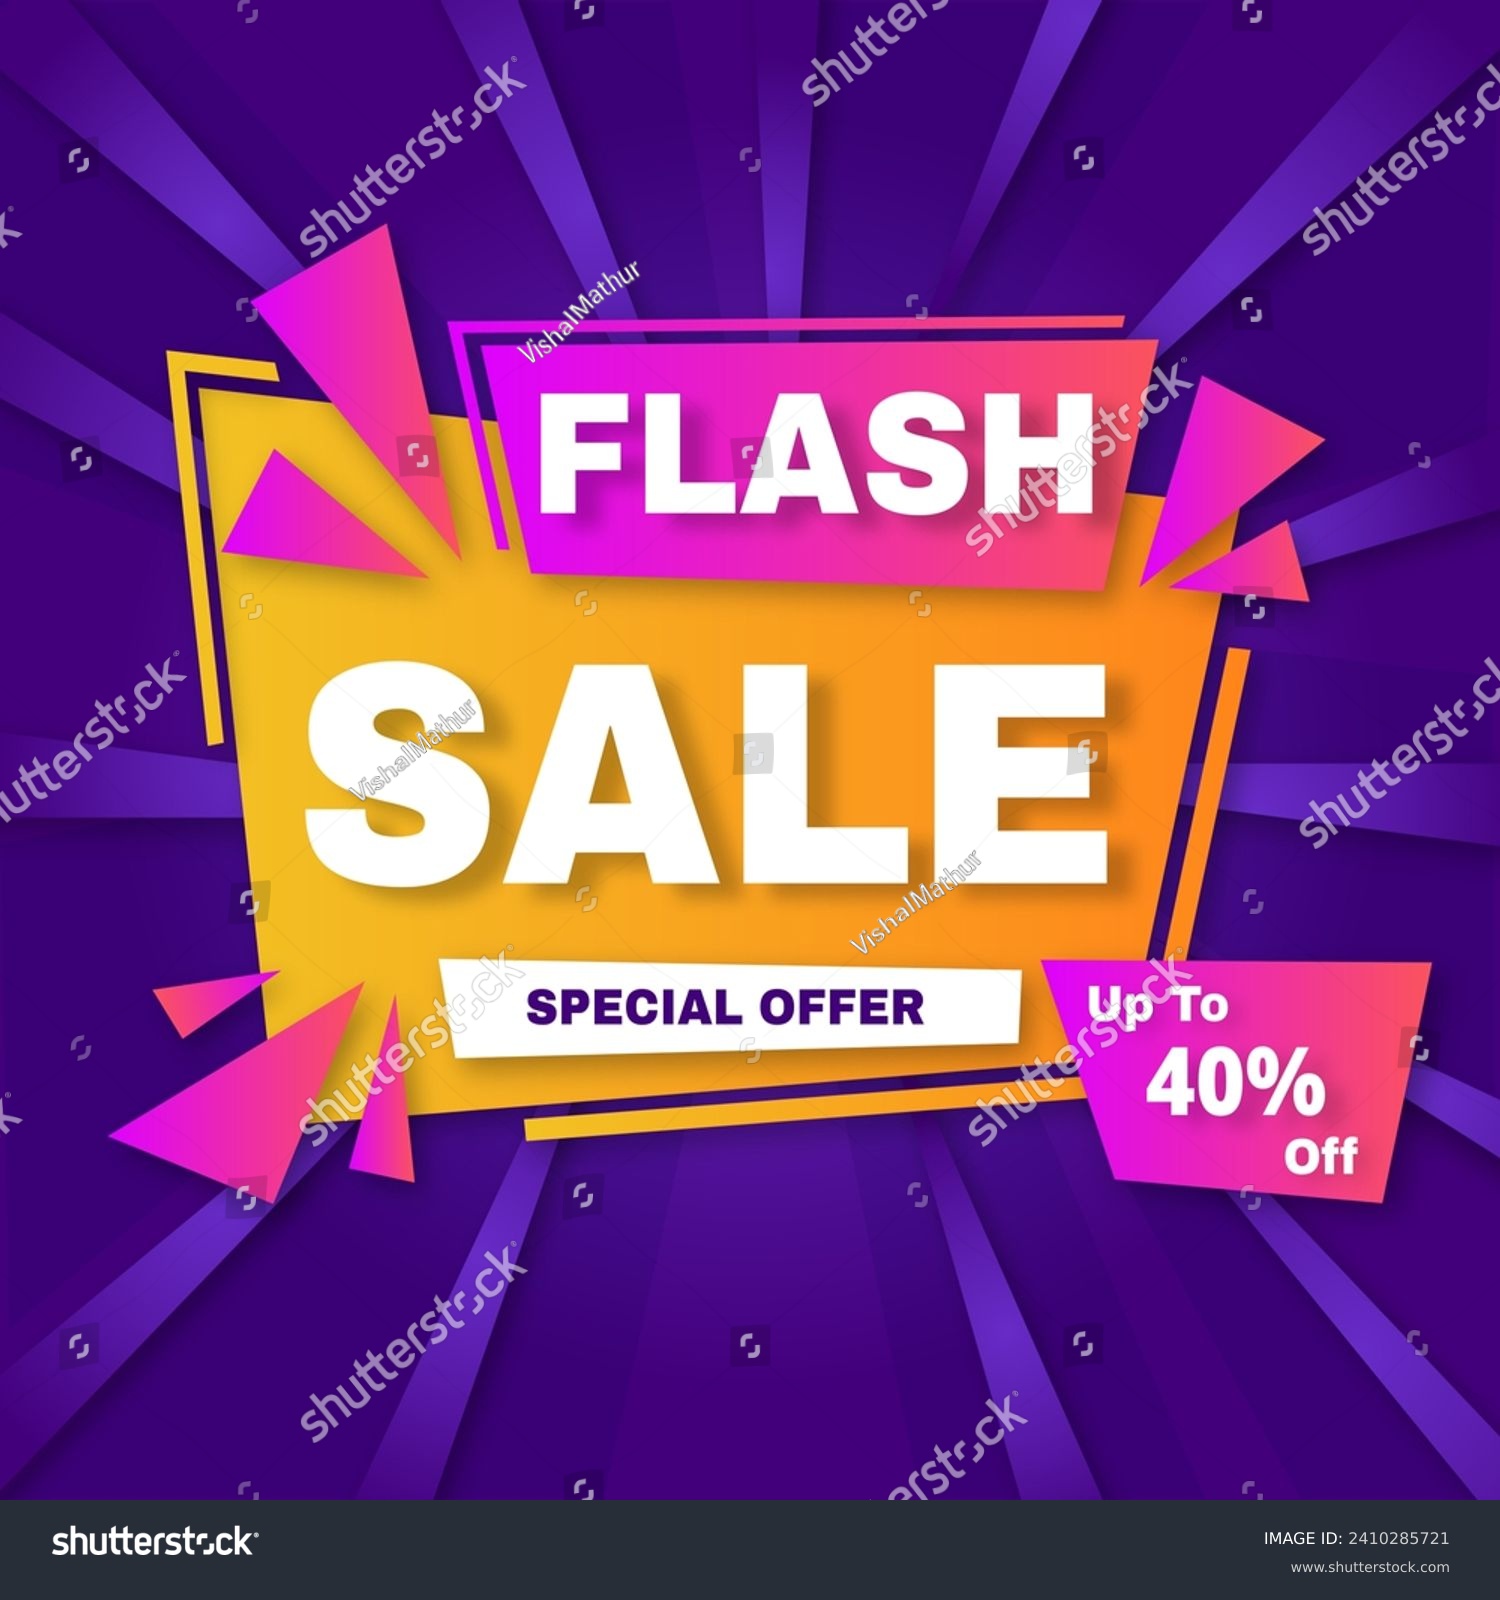 SVG of Flash Sale Vector flat design sale background with discount up to 40%. Special Offer. Vector illustration. Get discount 40%. svg